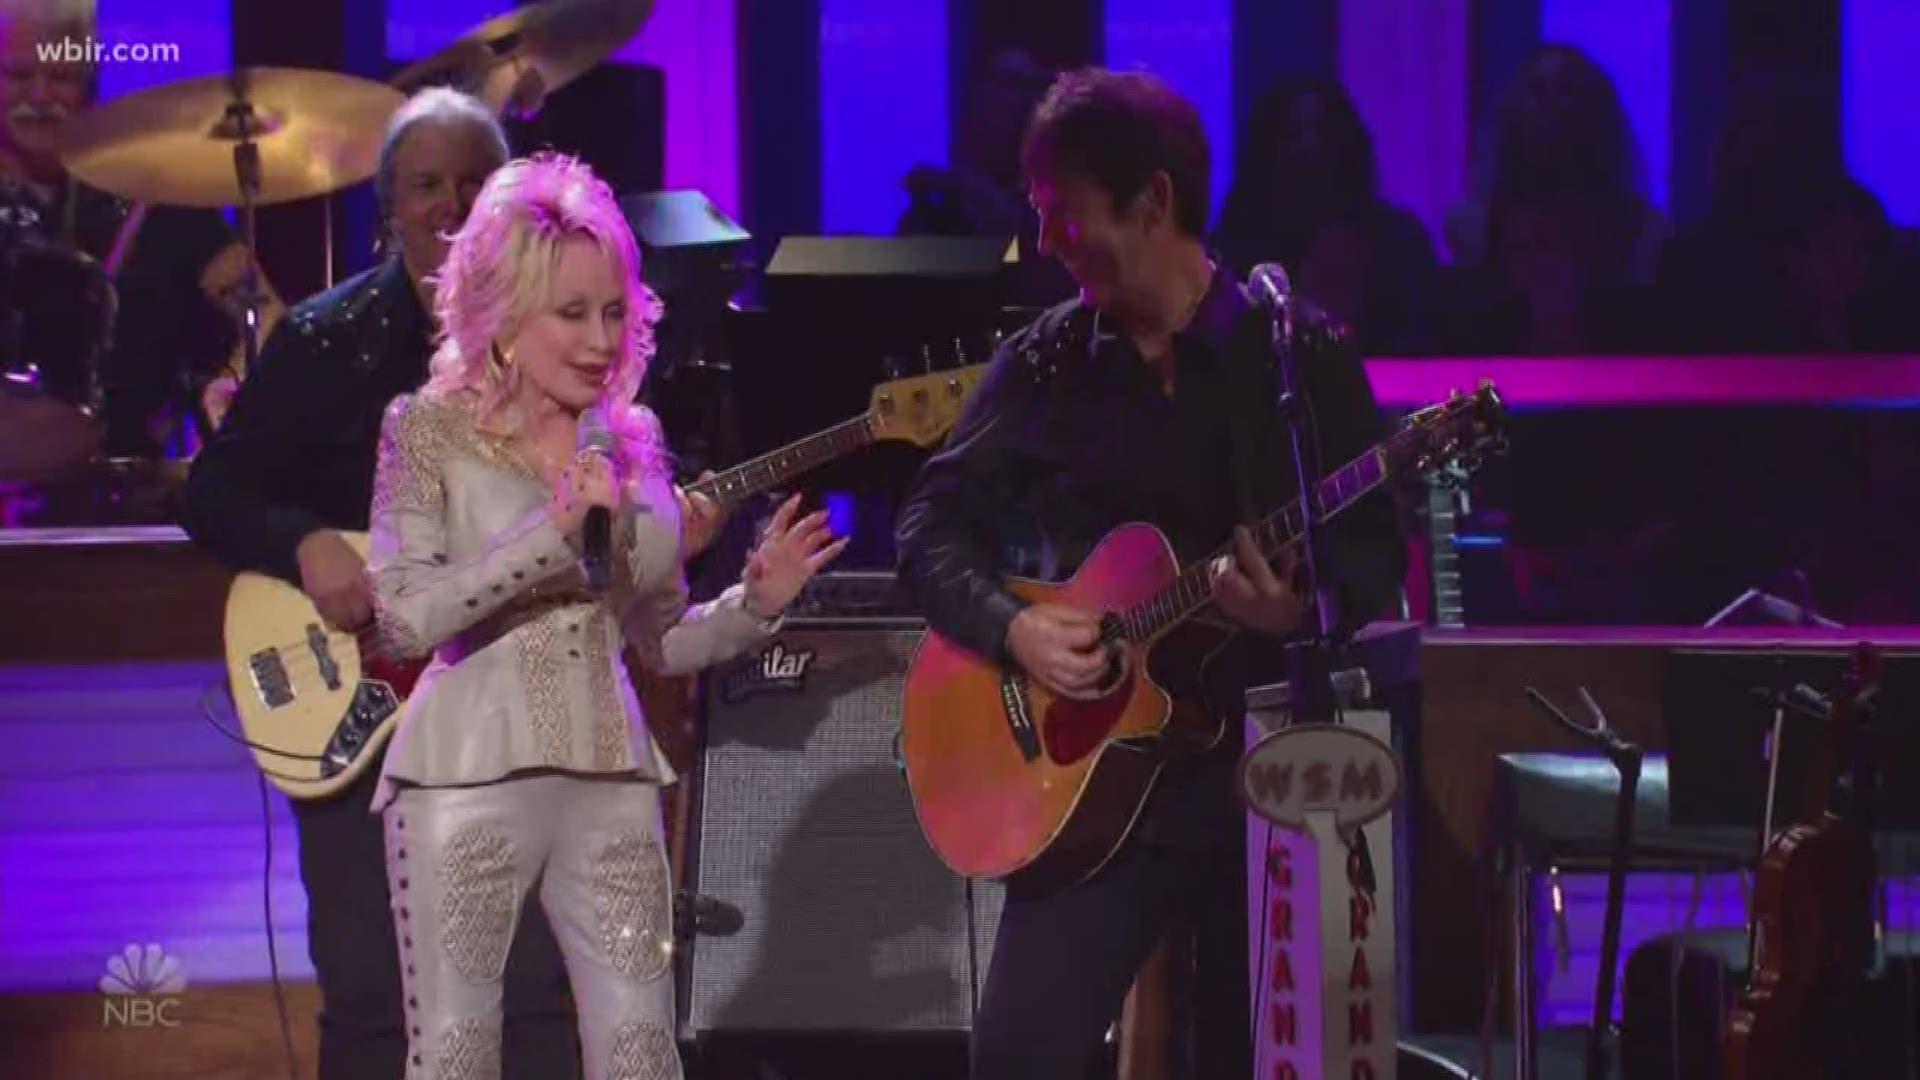 Dolly will go on stage at the Gift of Music charity concert at the Ryman Auditorium in Nashville, alongside other major performances.